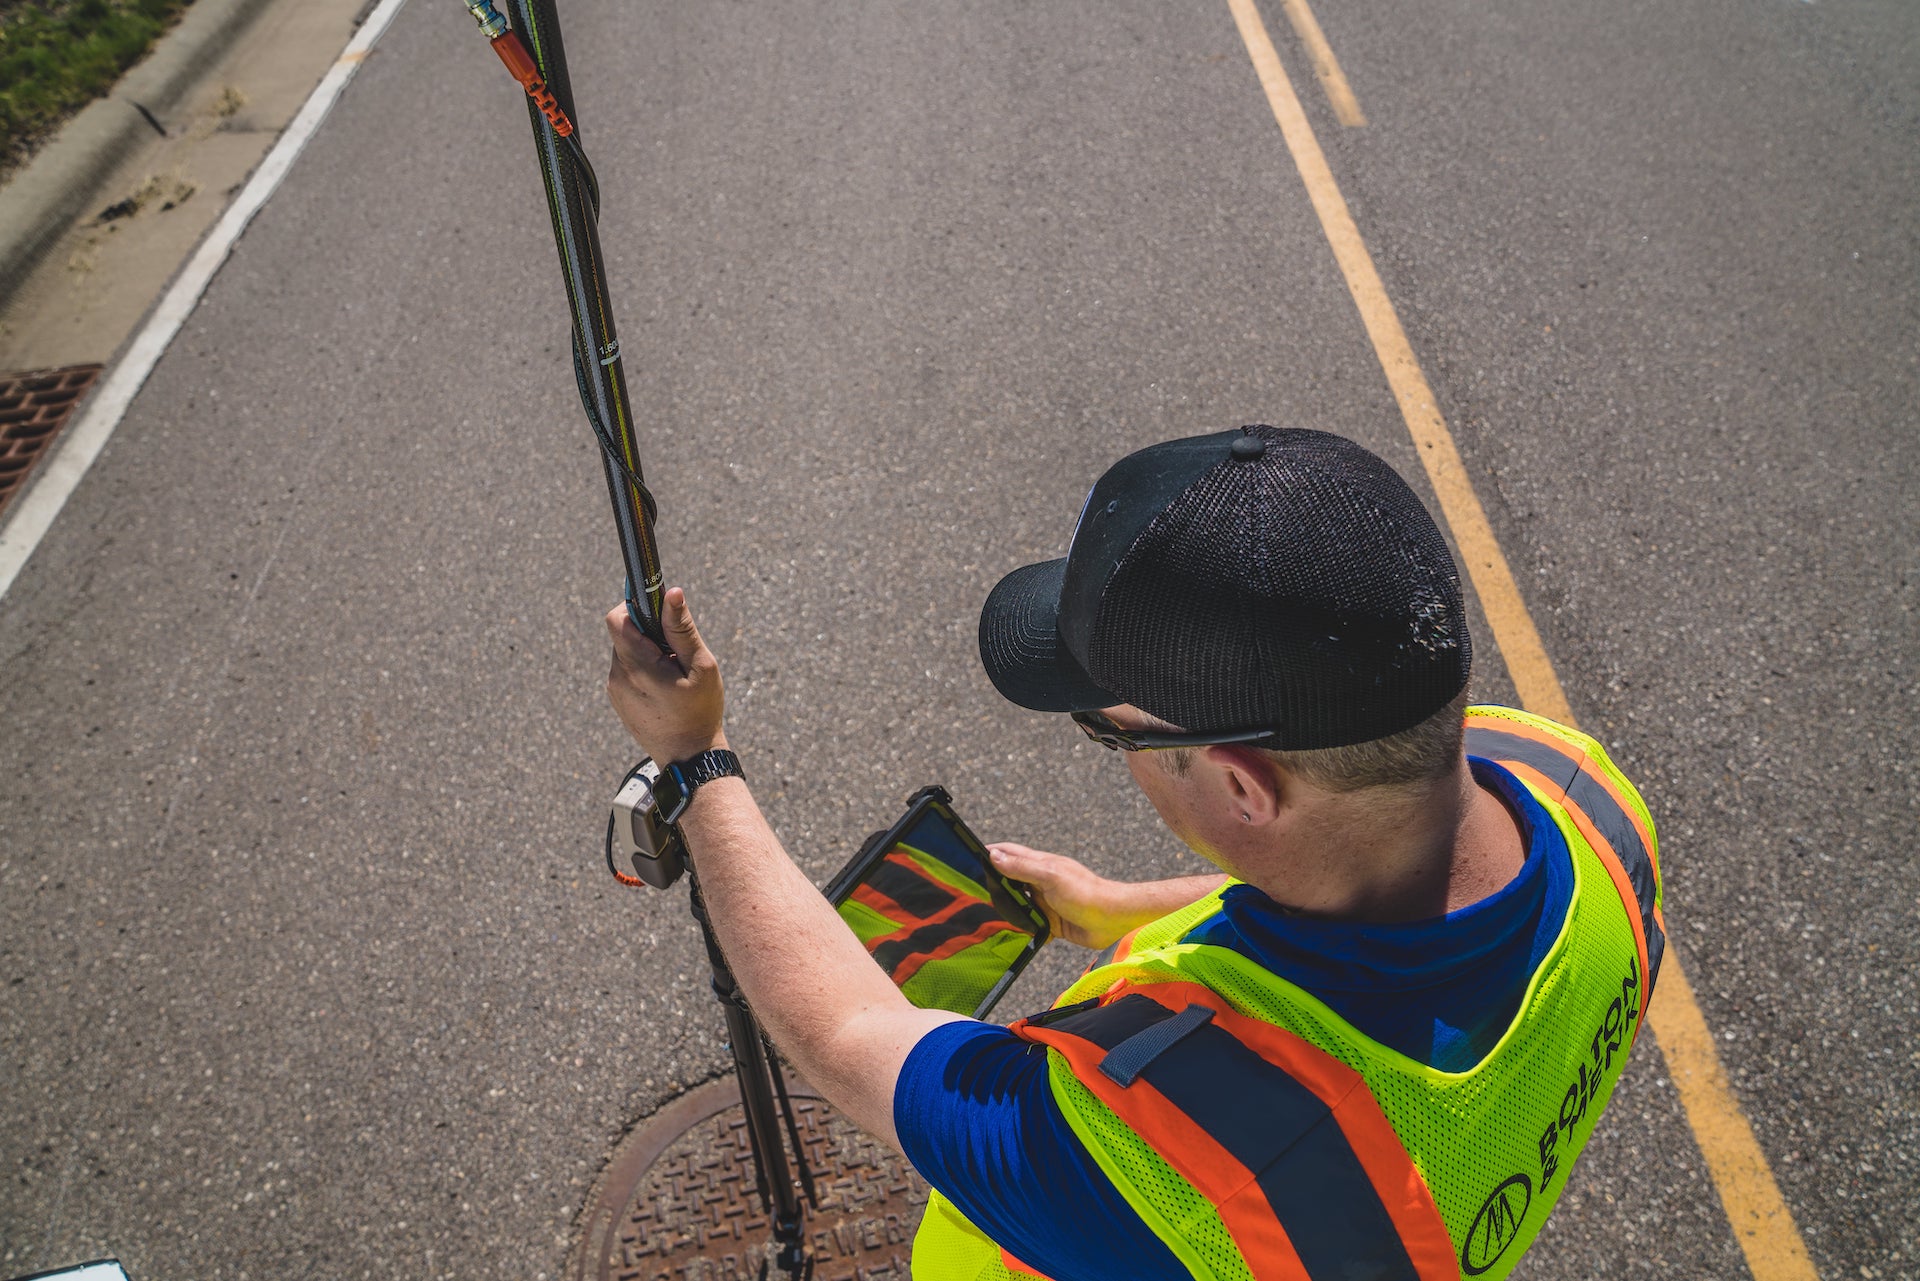 David Malm Uses the Eos Arrow Gold to Collect a Manhole Cover